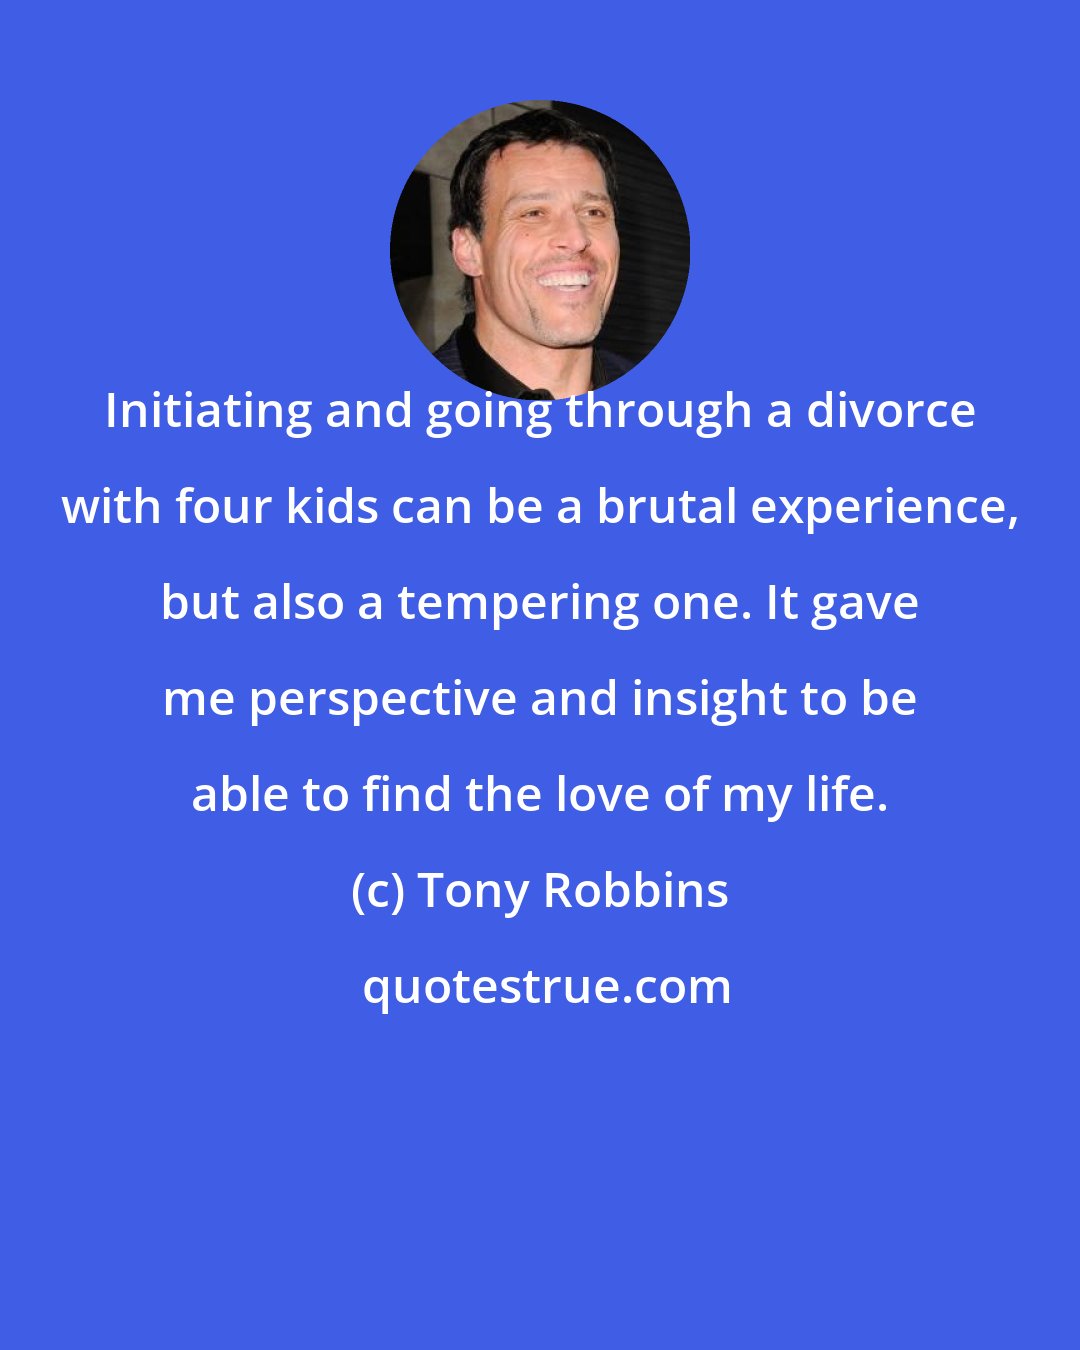 Tony Robbins: Initiating and going through a divorce with four kids can be a brutal experience, but also a tempering one. It gave me perspective and insight to be able to find the love of my life.